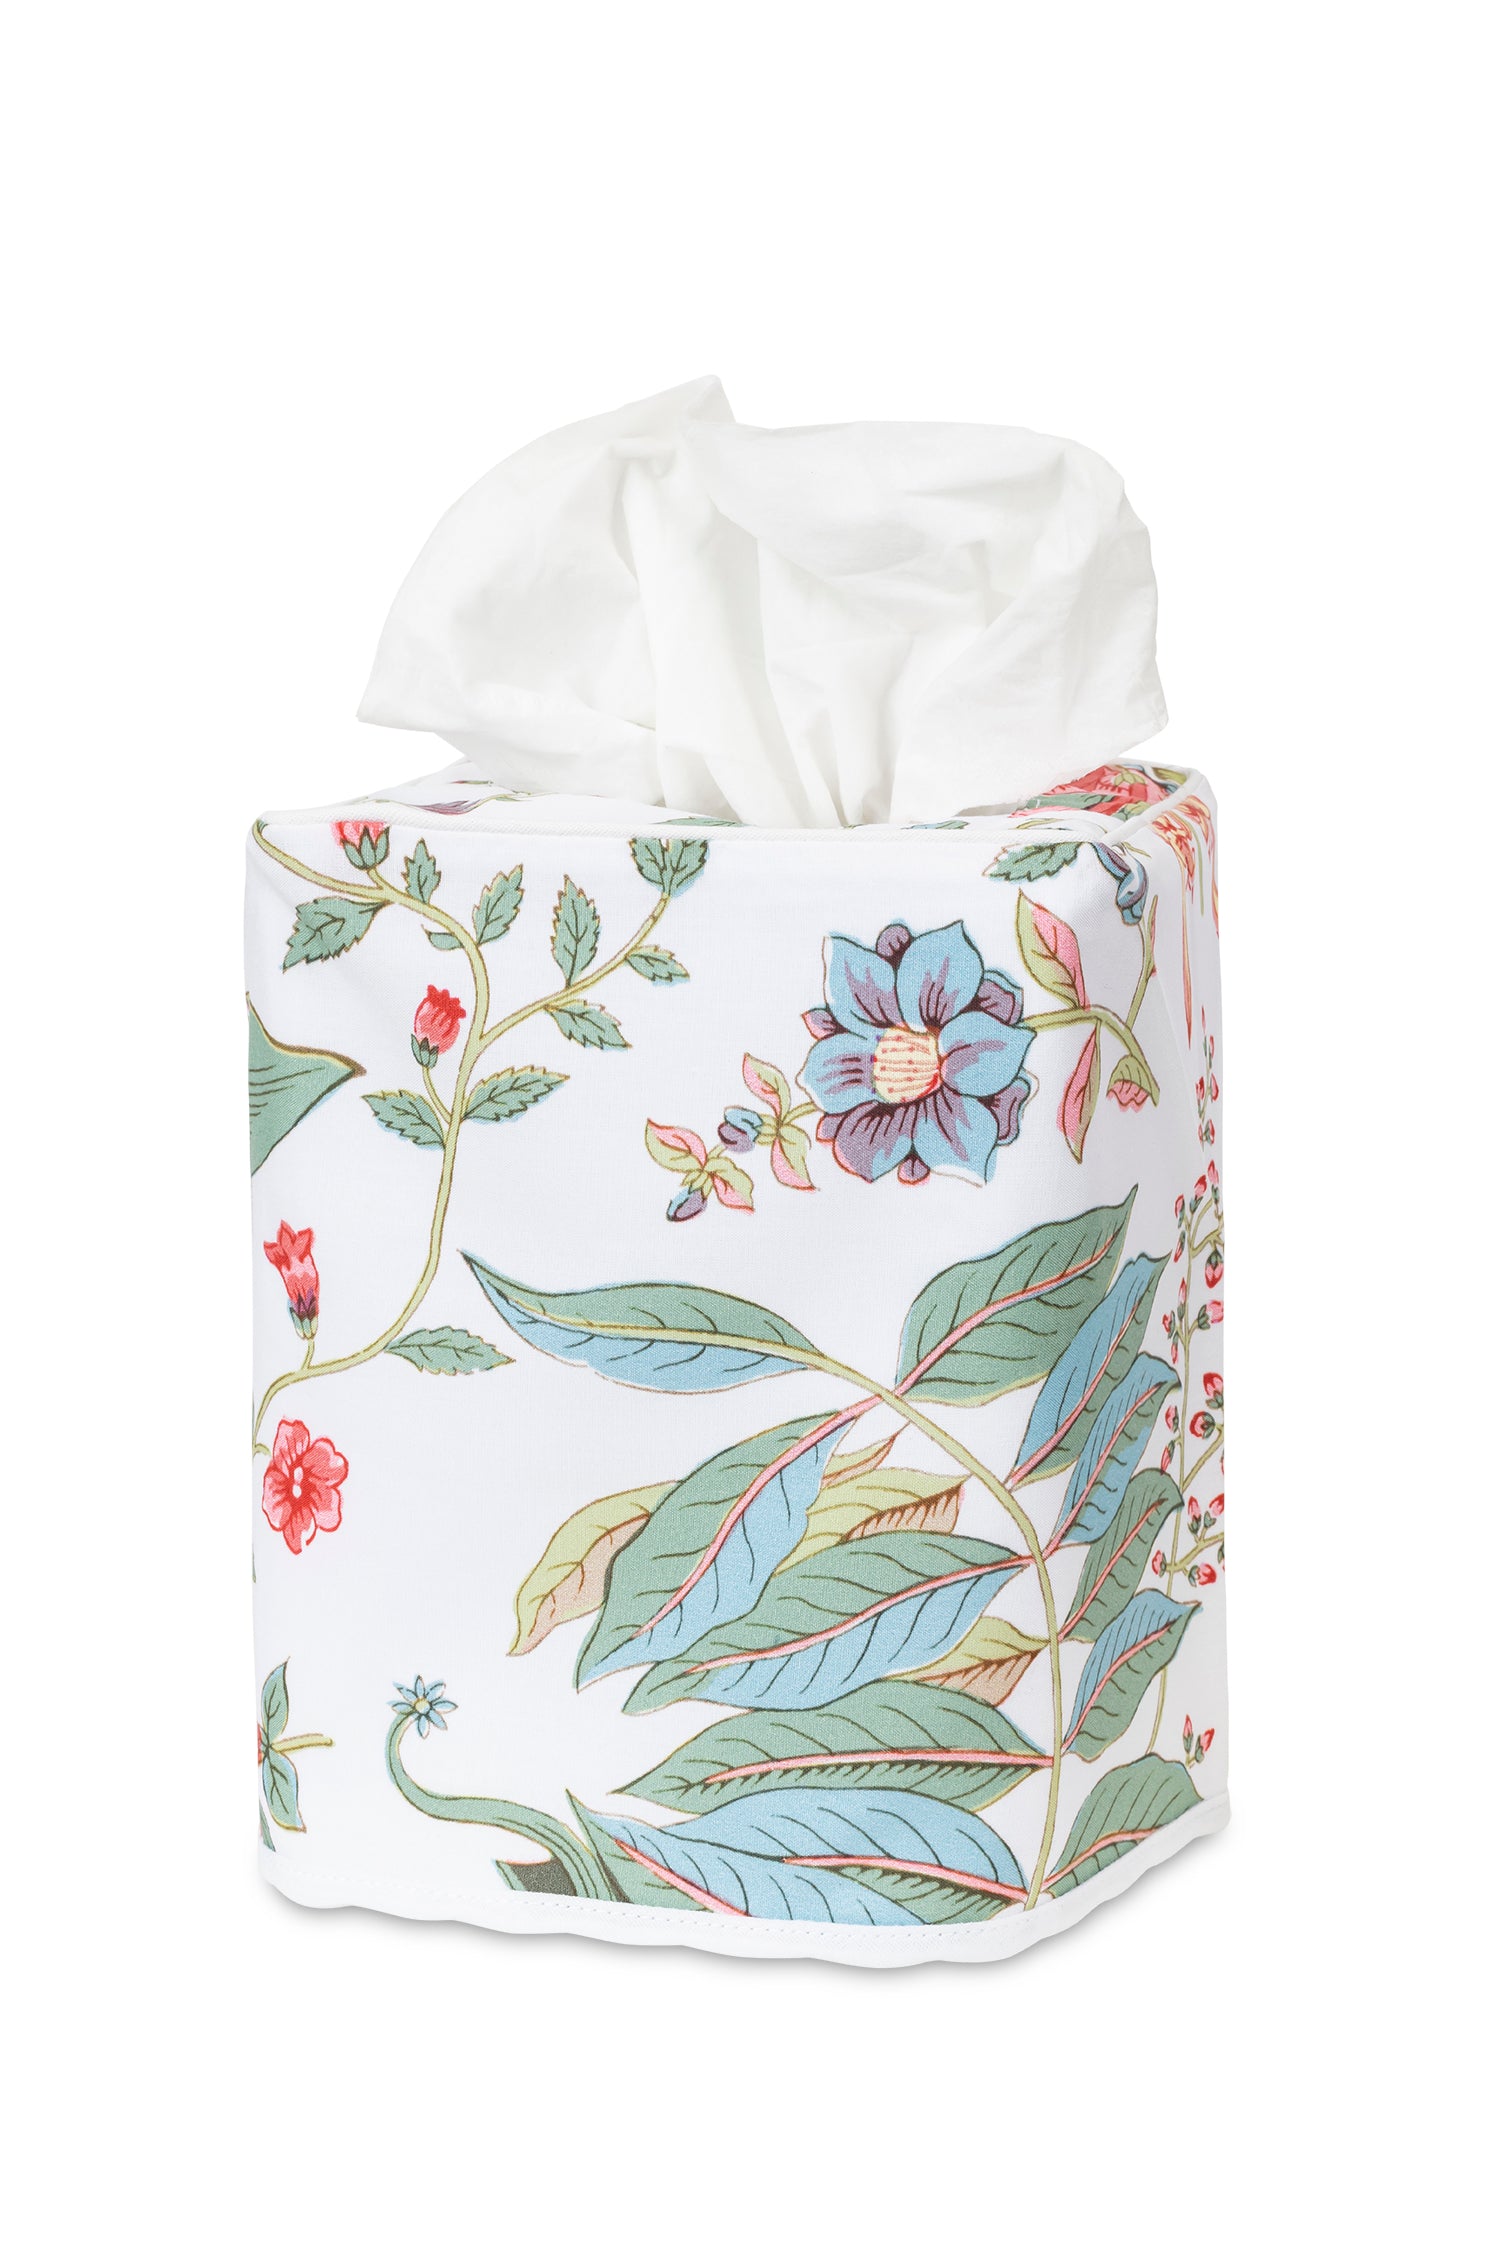 Tissue Box Cover - Schumacher Pomegranate Pink Coral Tissue Cover - Matouk at Fig Linens and Home